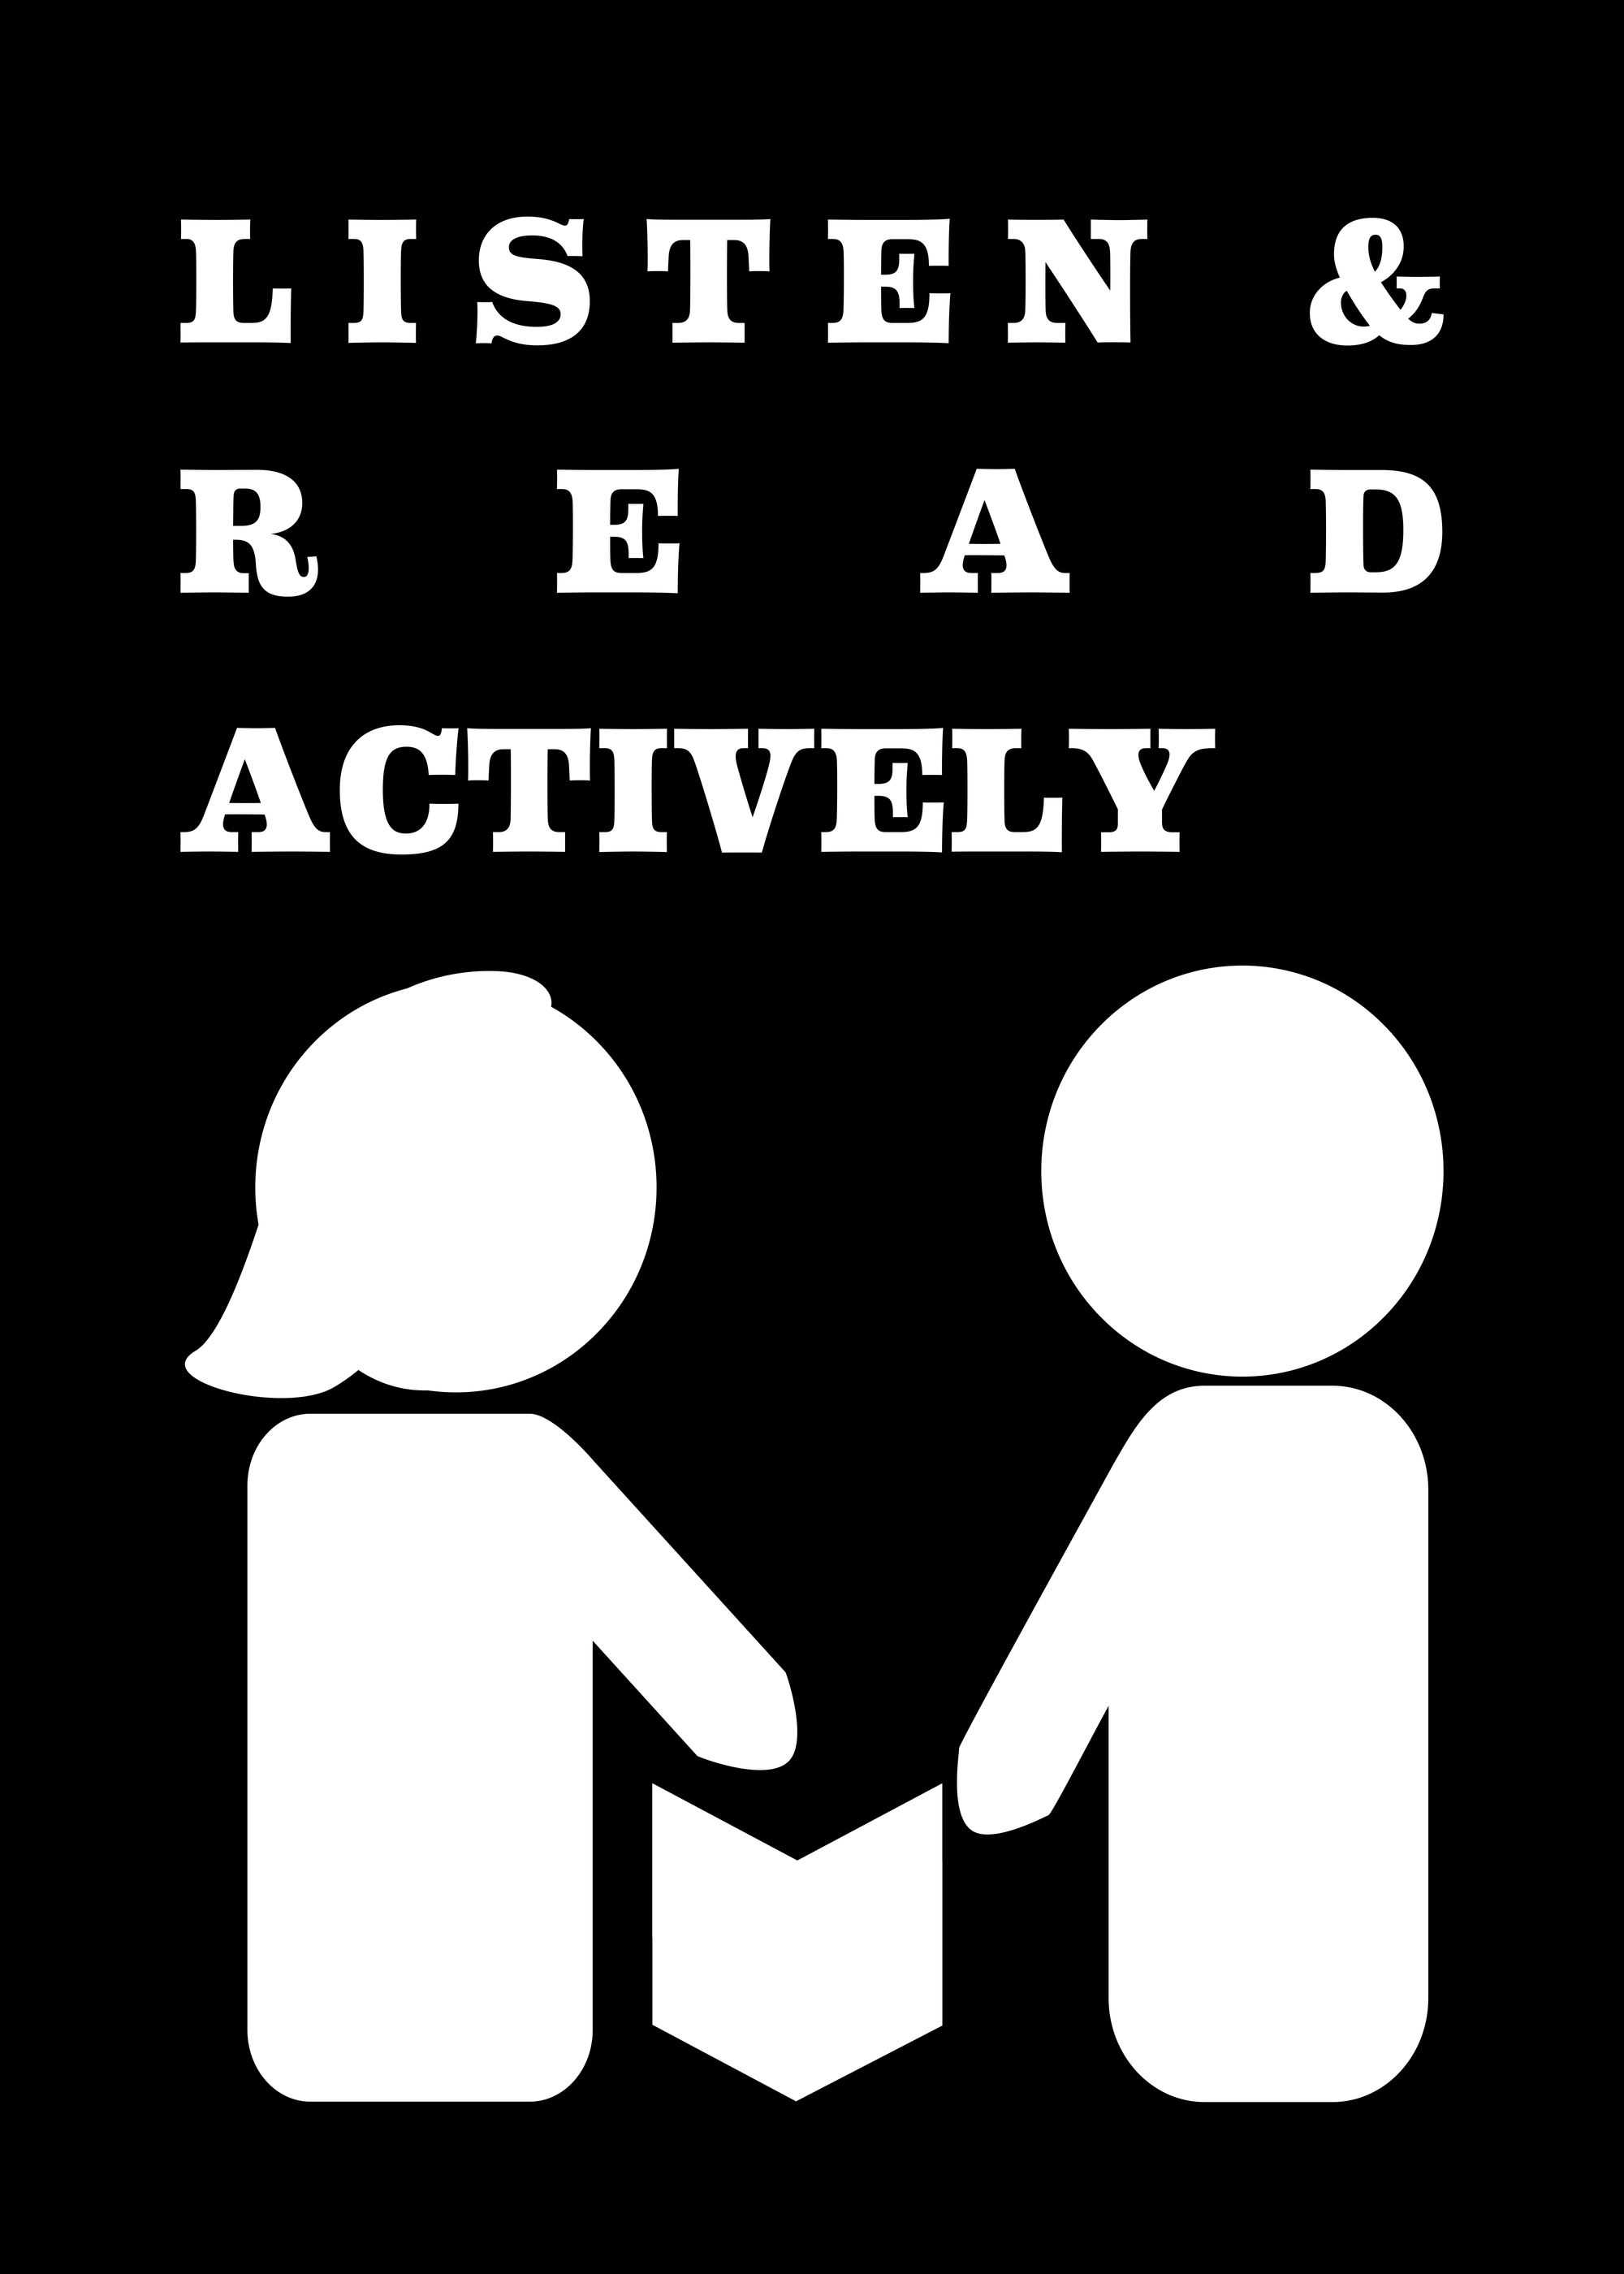 Listen and read actively